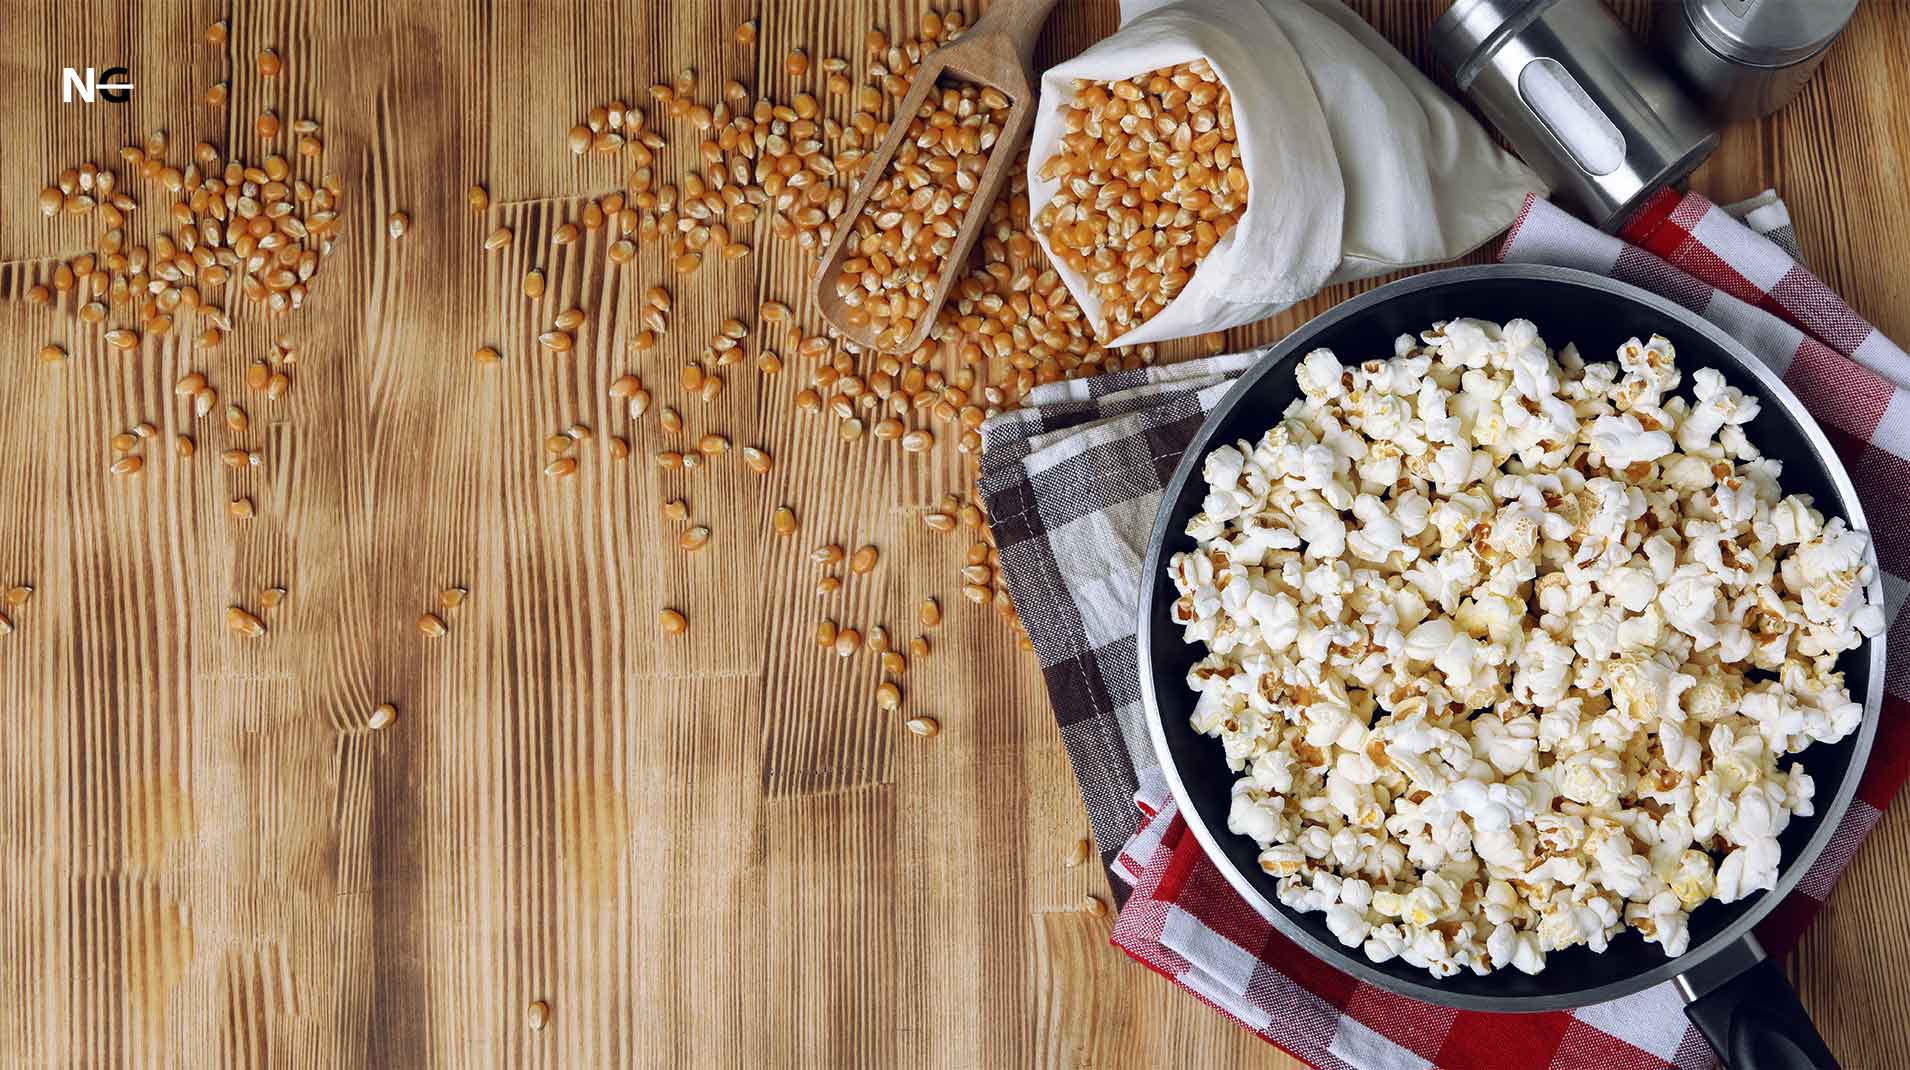 How To Check Gluten Content In Kettle Corn